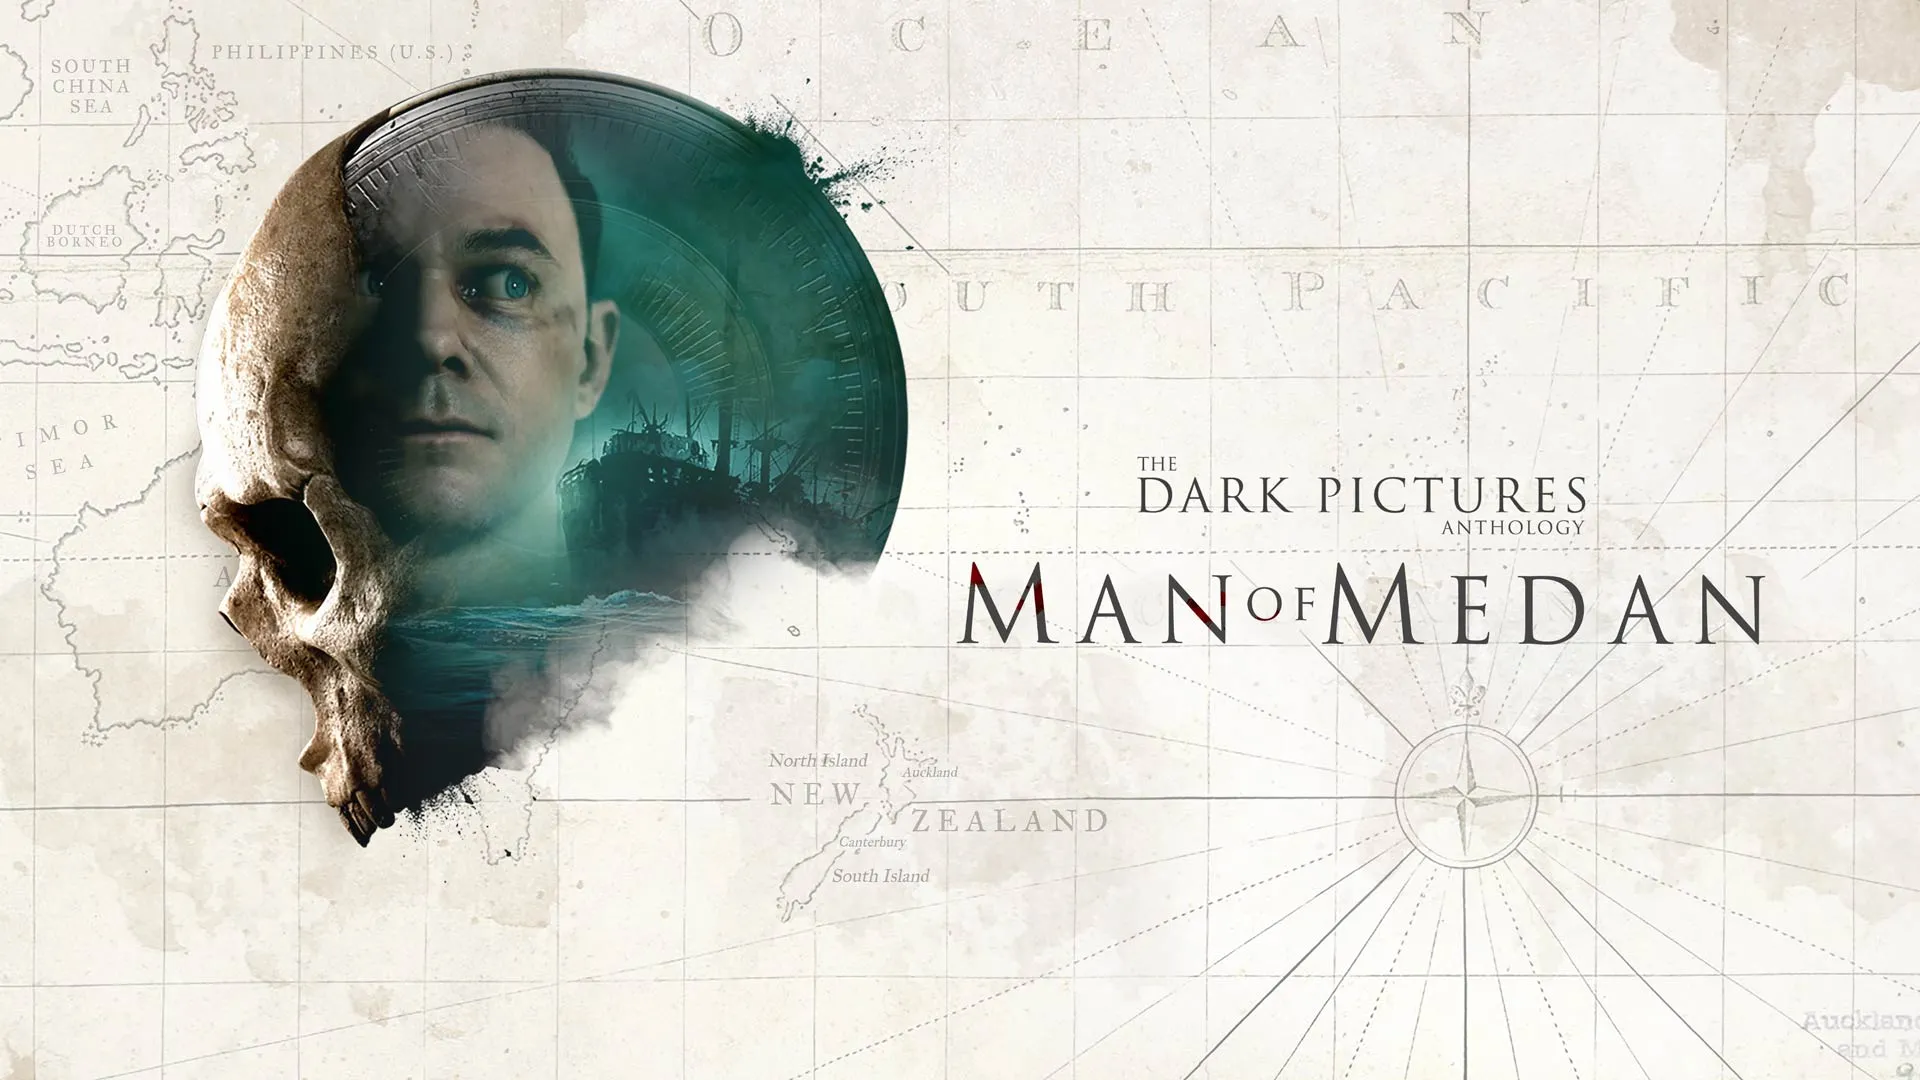 The Dark Pictures Anthology: Man of Medan and Little Hope launch on PS5 and Xbox Series X|S